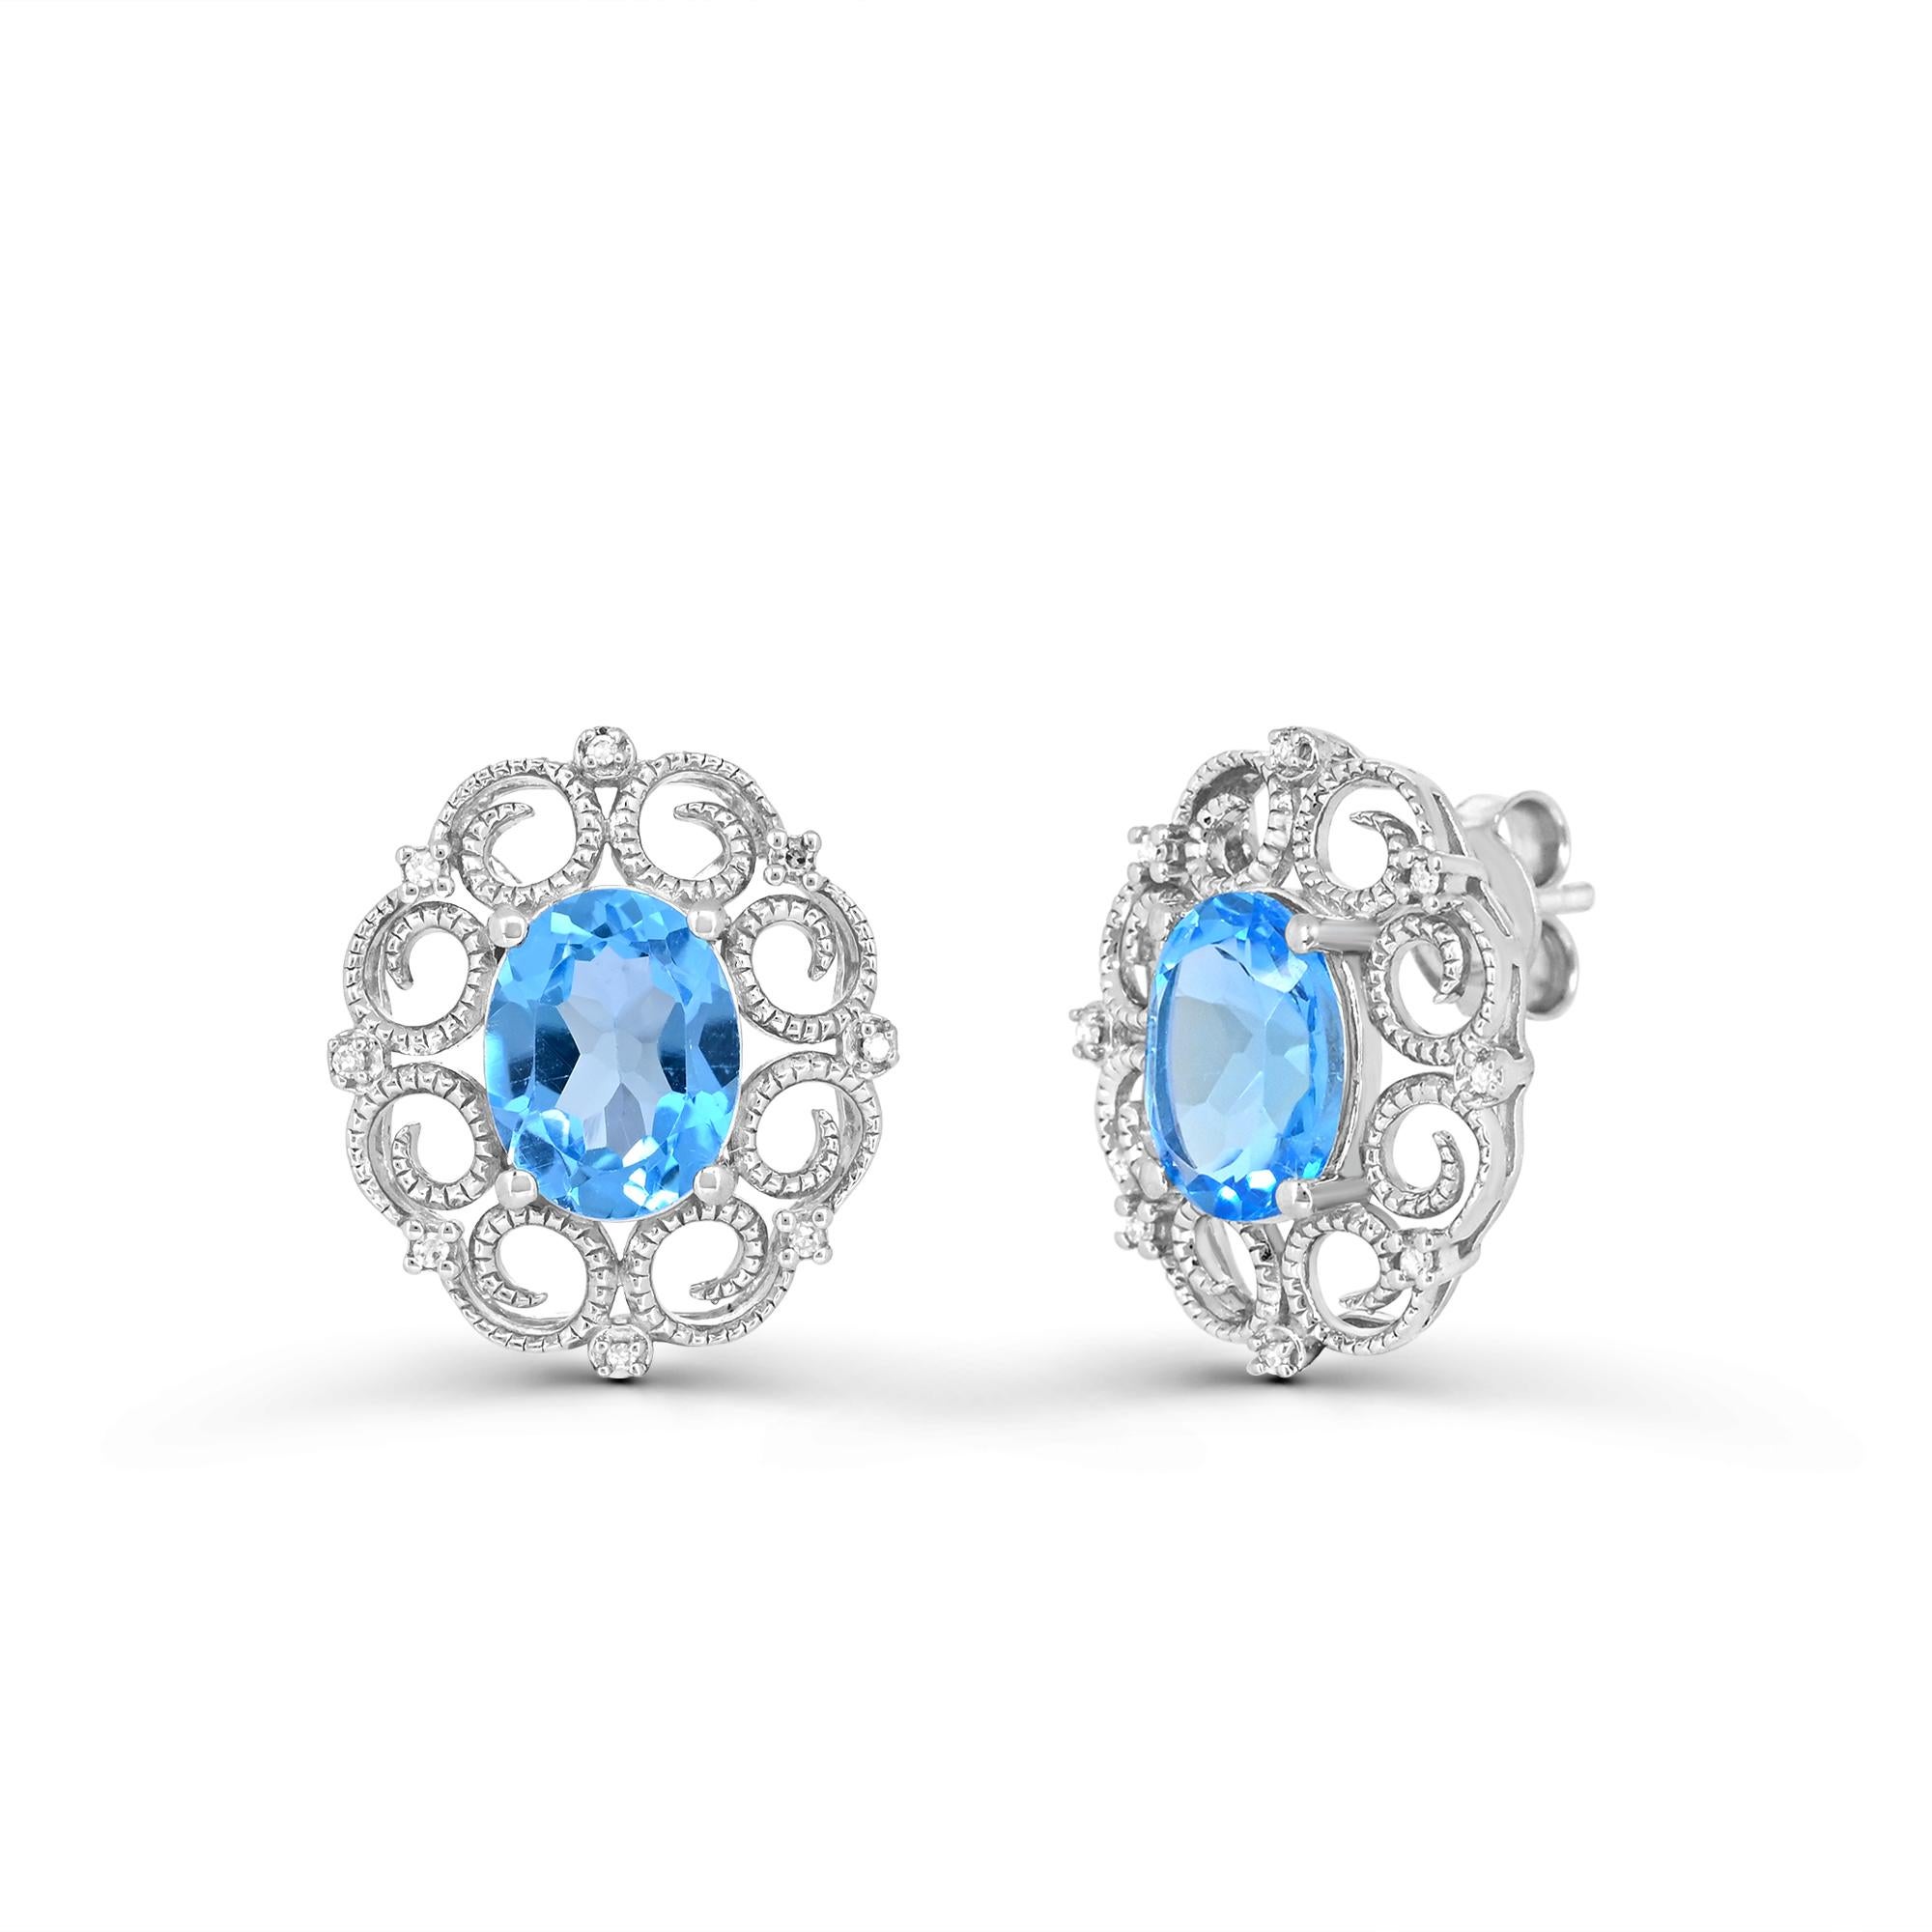 Indulge in elegance with our 4-1/2 Carat Swiss Blue Topaz and White Diamond Stud Earrings. Crafted with sterling silver patterns, each earring features a stunning oval Swiss blue topaz accented by round single-cut diamonds. With push-back post